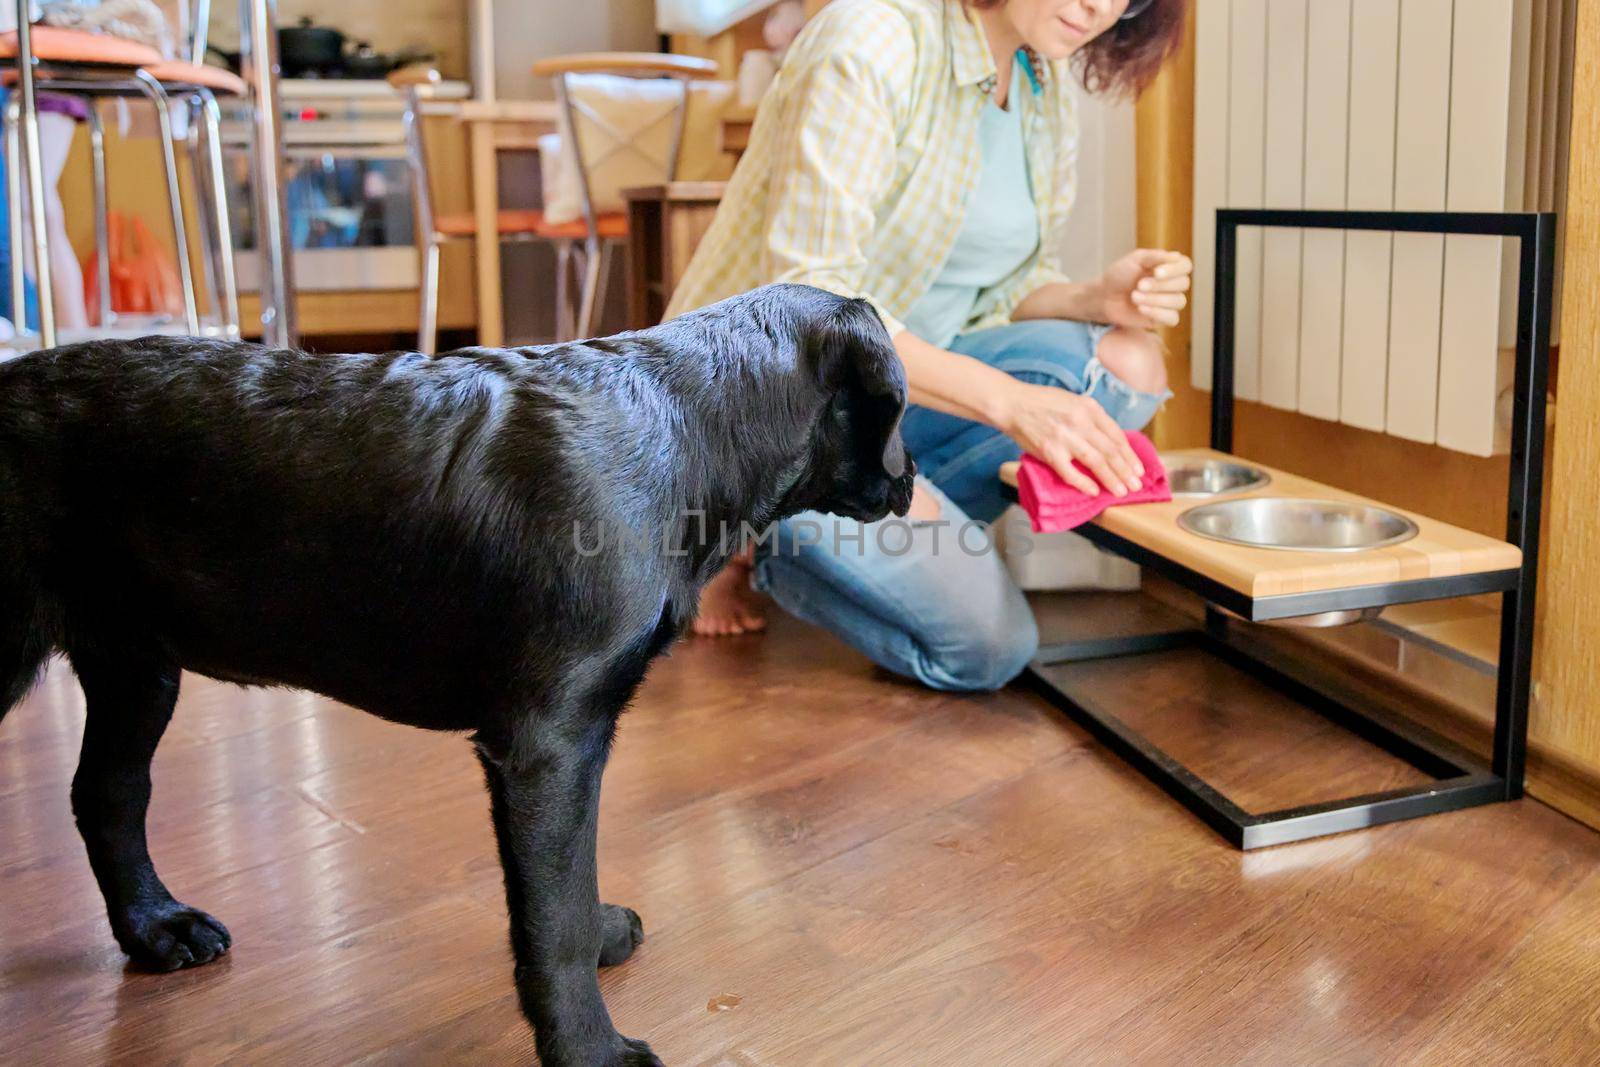 Middle aged woman and pet dog at home in kitchen interior by VH-studio